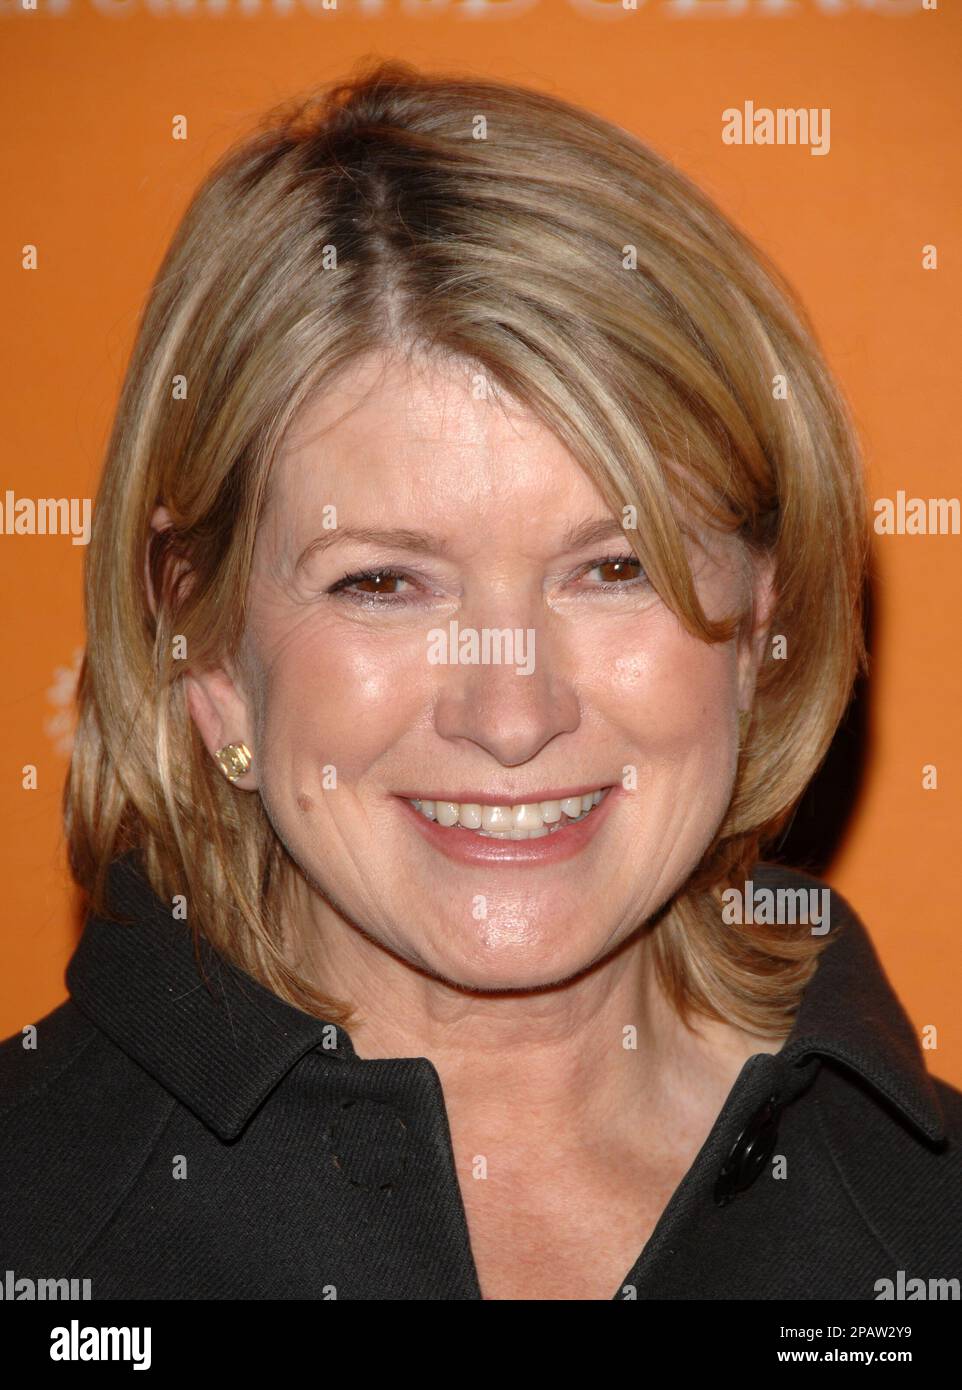 https://c8.alamy.com/comp/2PAW2Y9/file-martha-stewart-arrives-at-the-first-annual-martha-stewart-living-dreamers-into-doers-awards-in-new-york-in-this-oct-23-2007-file-photo-the-dispute-between-martha-stewart-and-some-of-her-neighbors-over-her-bid-to-trademark-the-name-of-their-village-has-been-resolved-with-a-compromise-katonah-furniture-ok-katonah-paint-no-way-ap-photopeter-kramer-file-2PAW2Y9.jpg